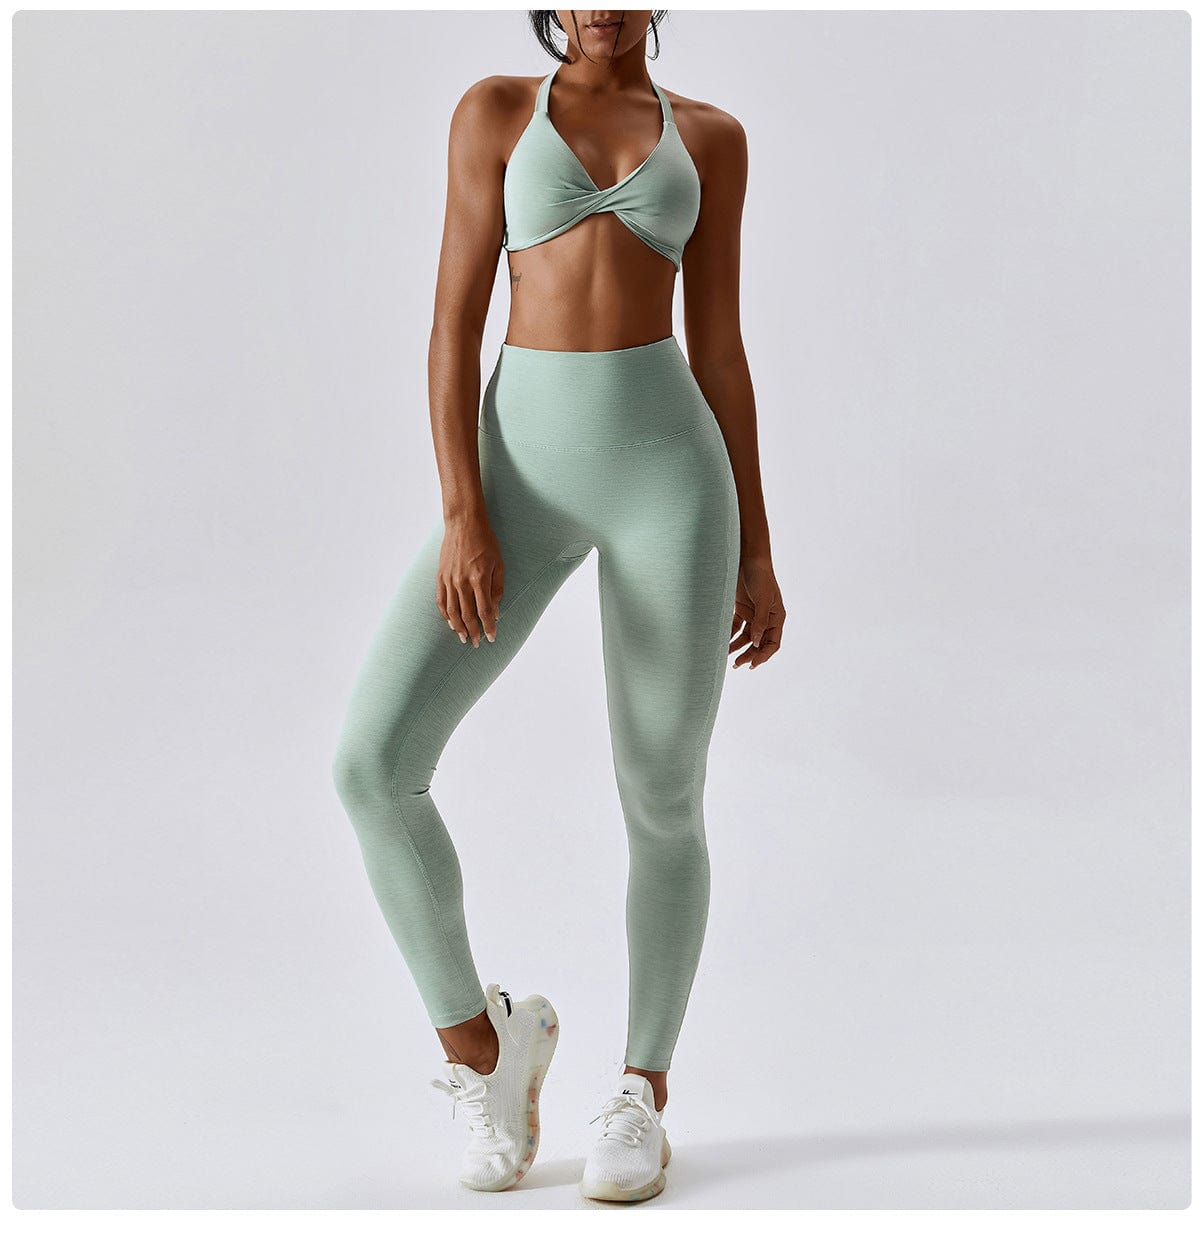 SqueezMeSkinny Light Green / S Quick Drying Fitness Activewear with Scrunch Hip Up Leggings